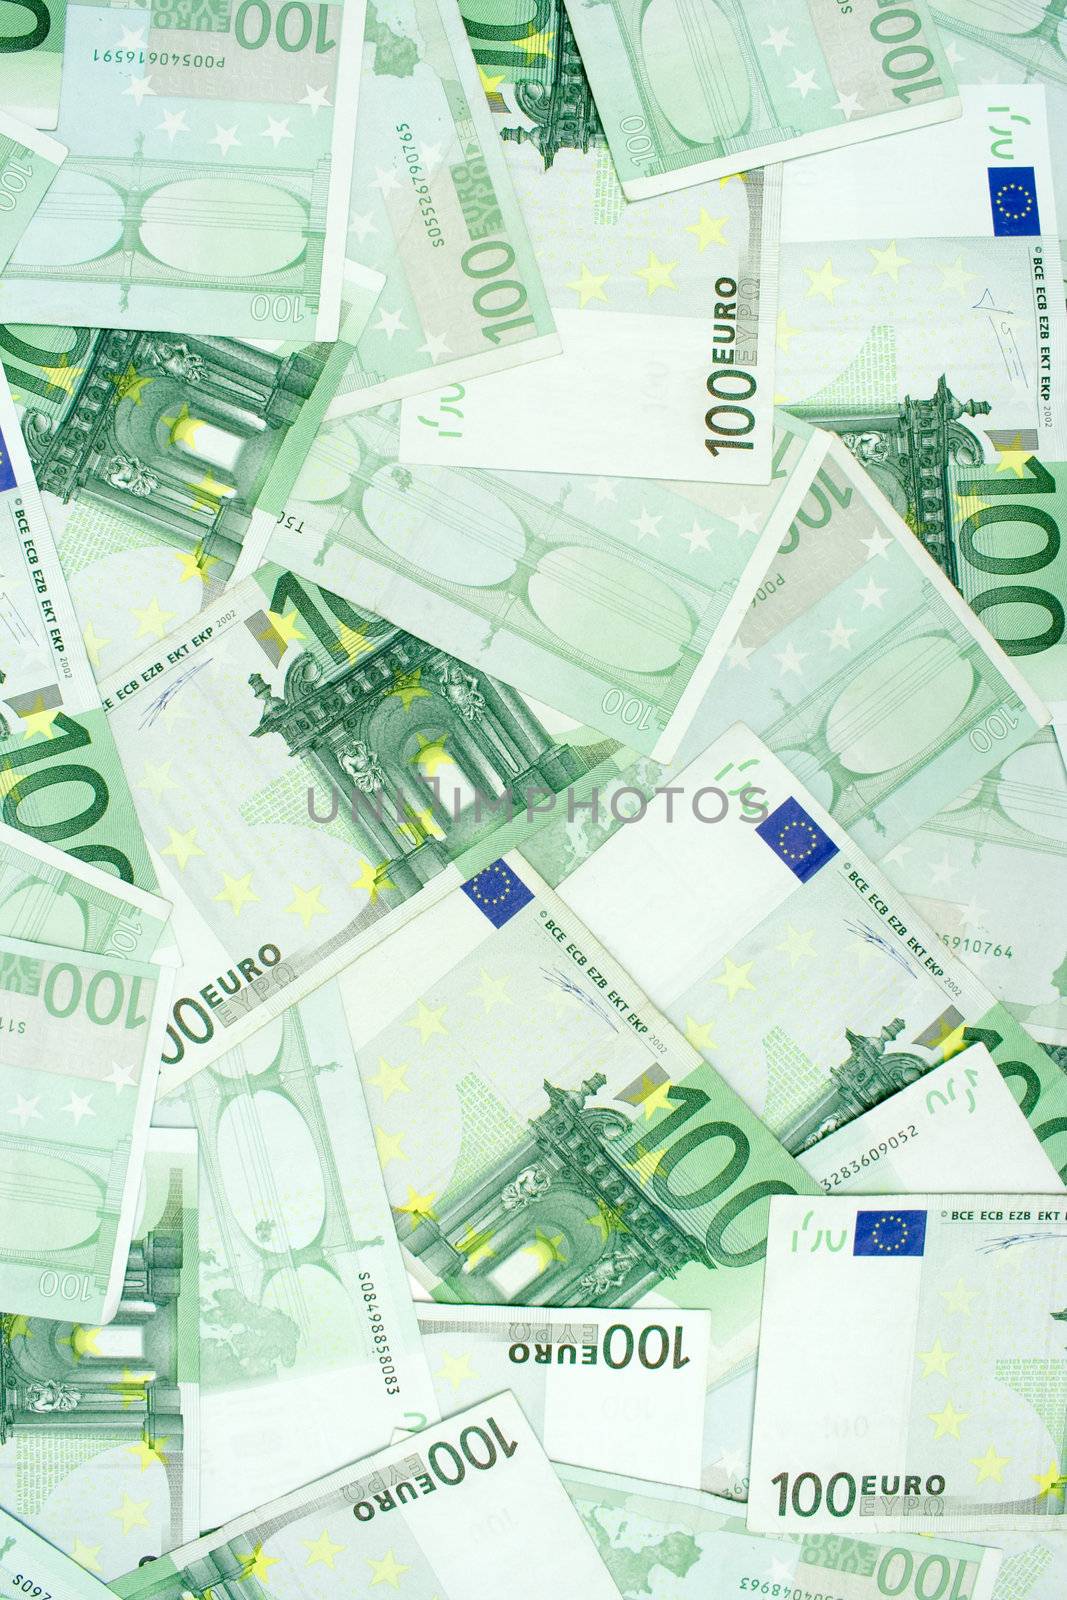 One Hundred Euro Banknotes by winterling